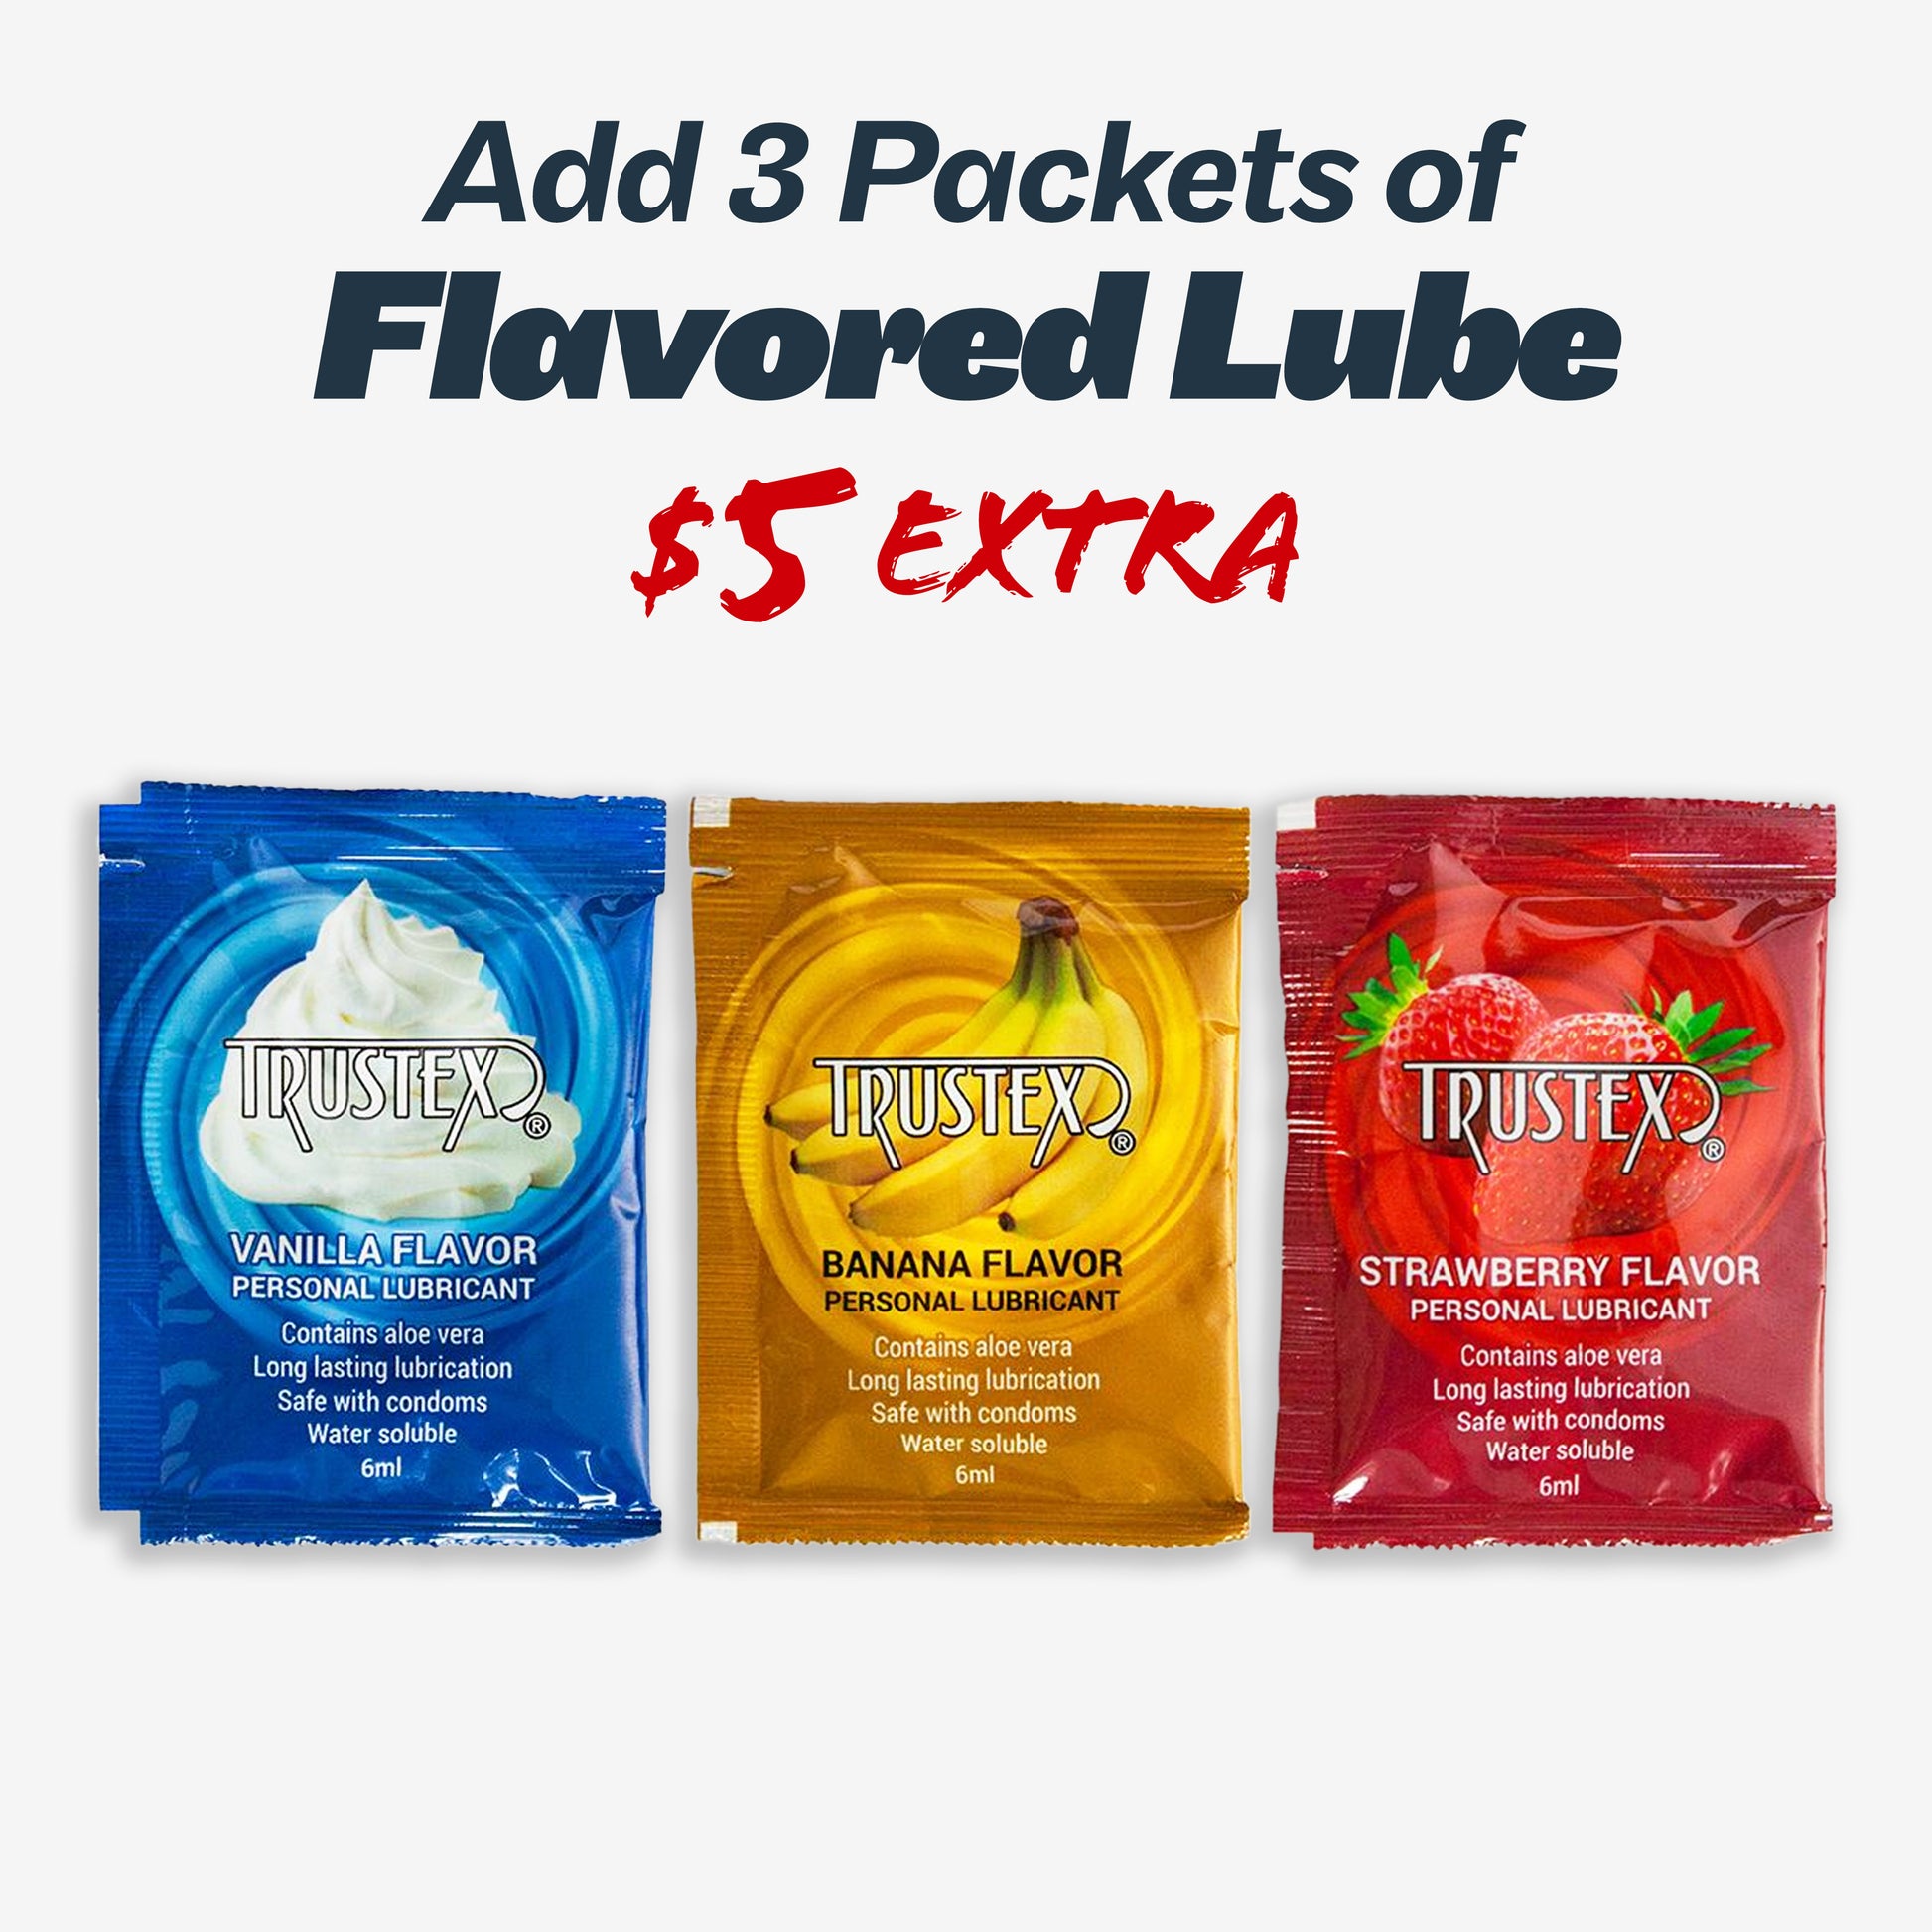 Add 3 packets of flavored lube! Only $5 extra. Comes in assorted flavors including vanilla, banana, strawberry and more.